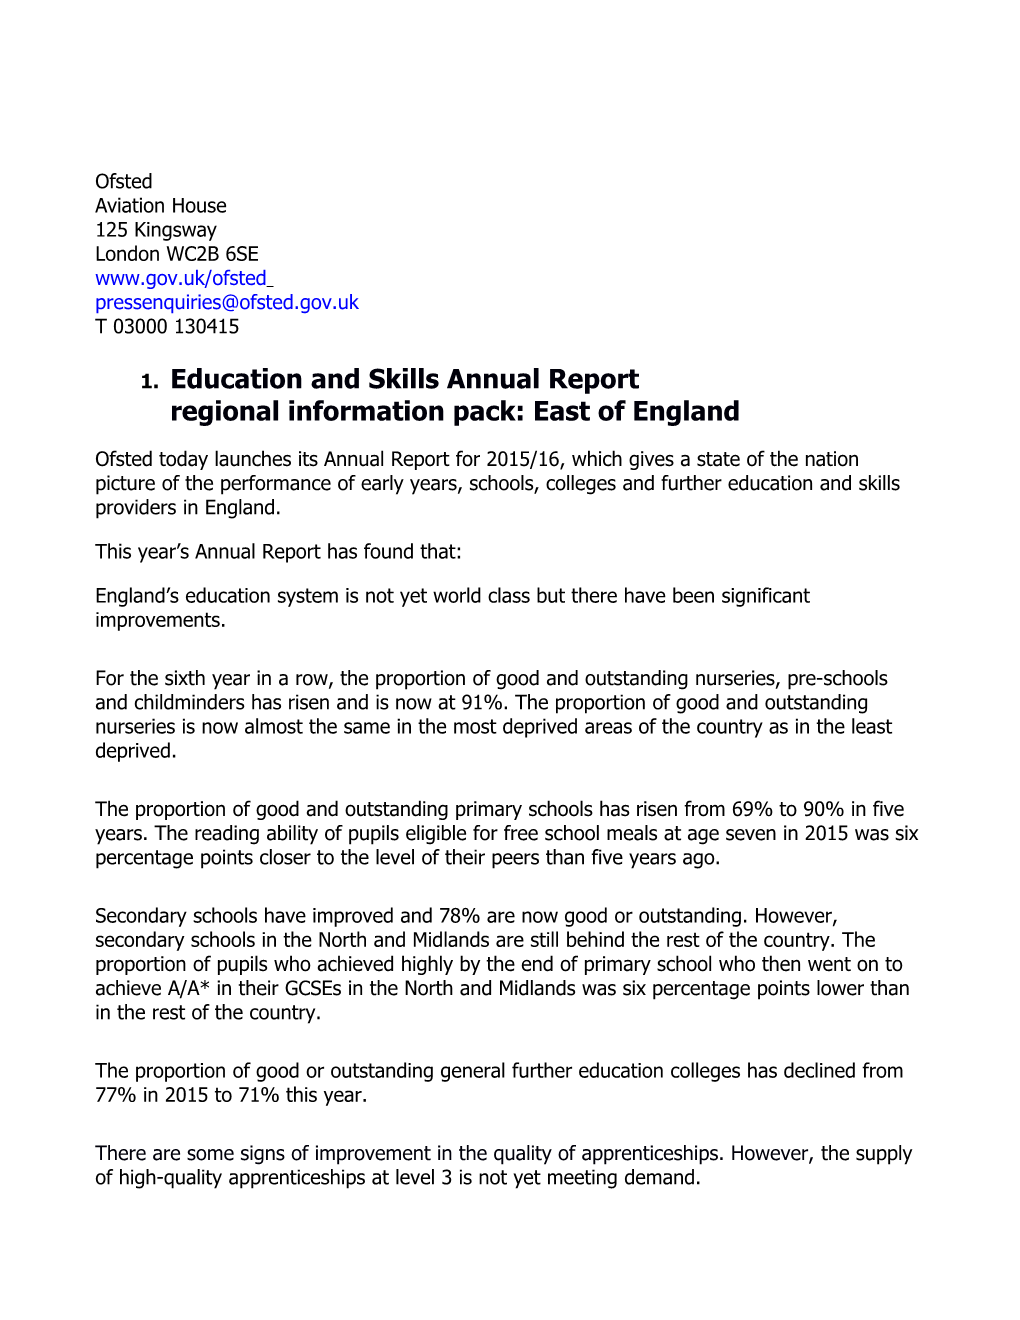 Education and Skills Annual Report Regional Information Pack: East of England